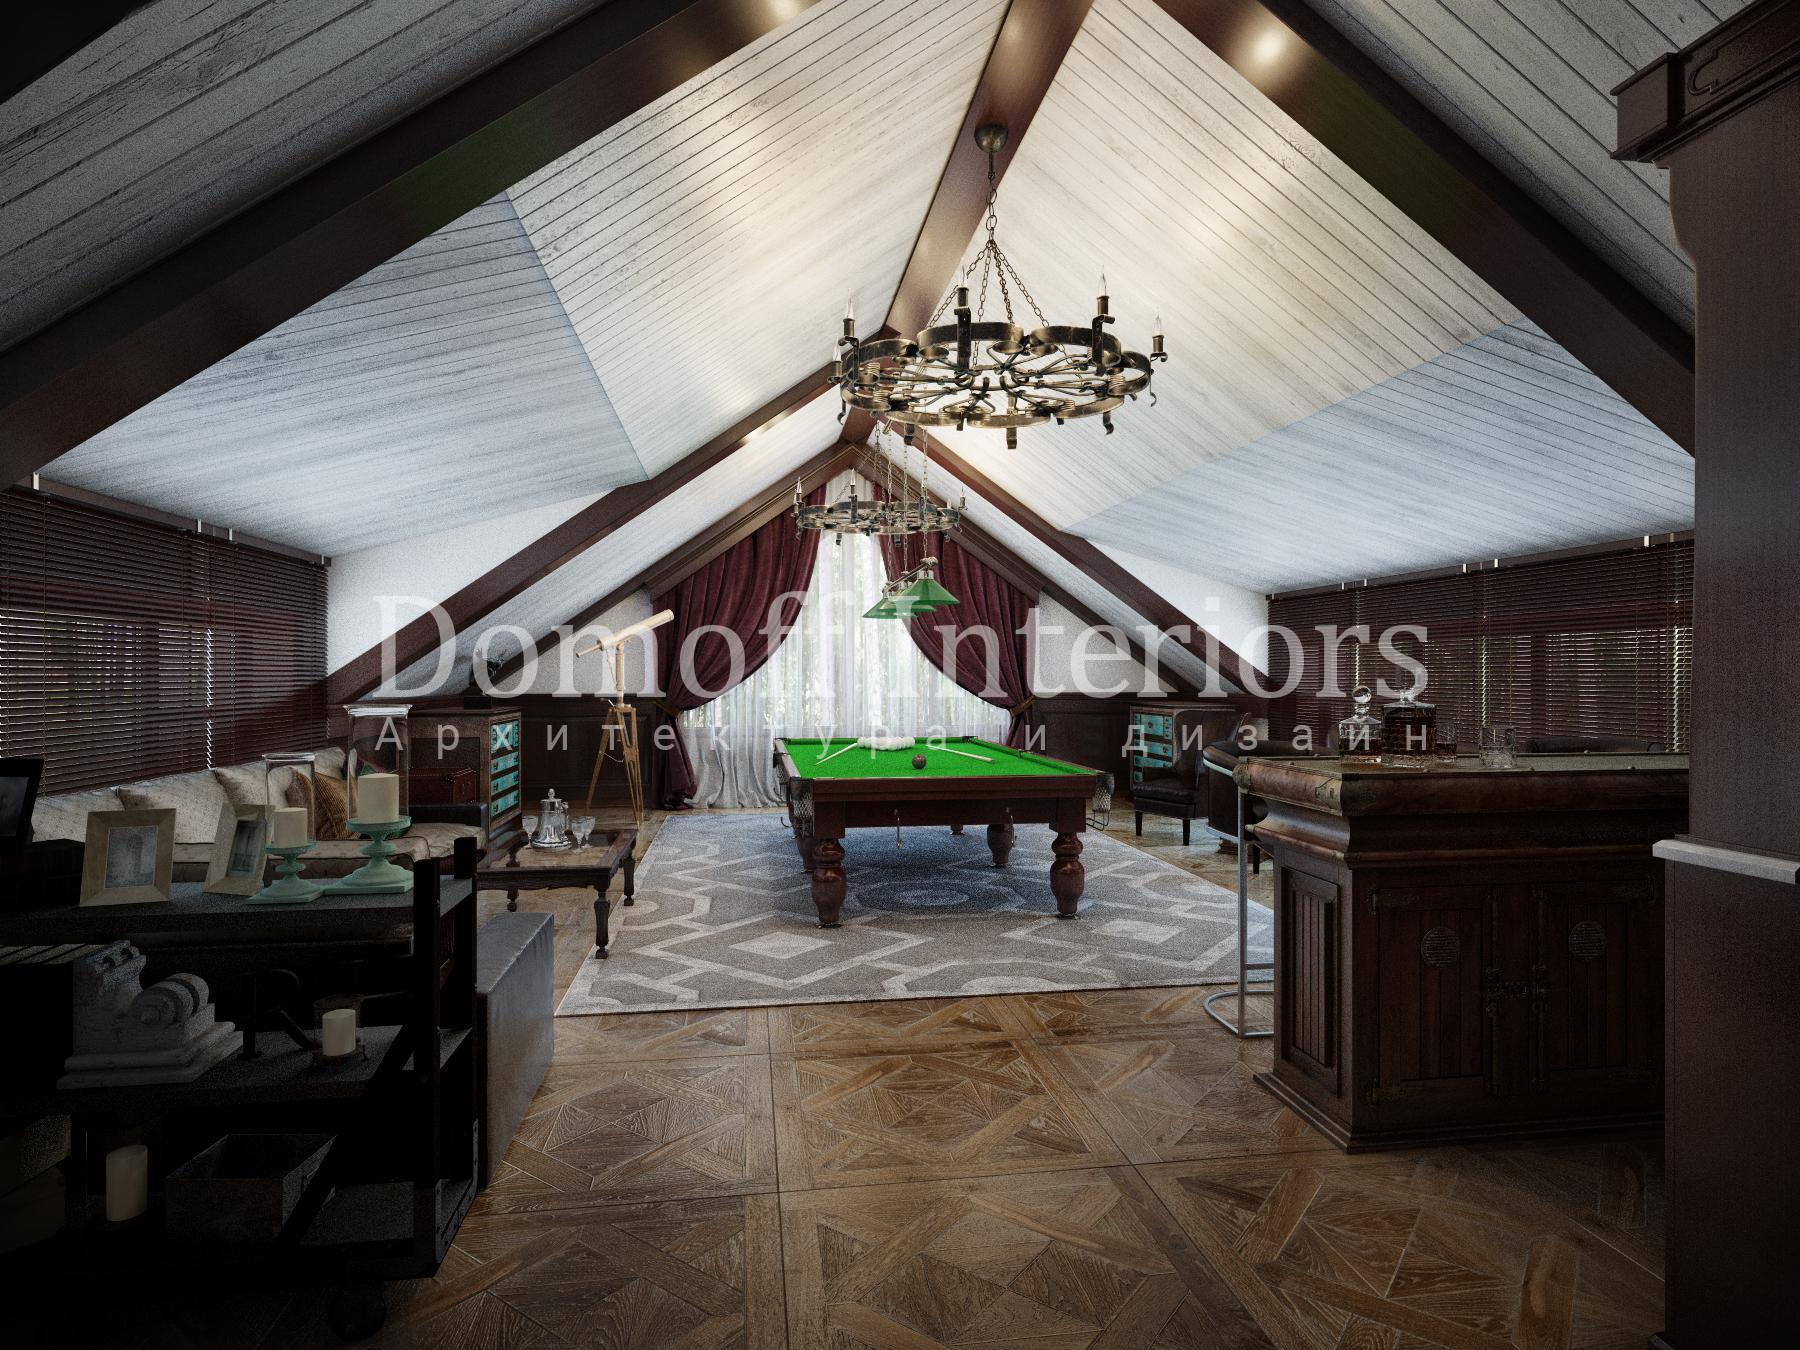 Billiard room made in the style of Chateau